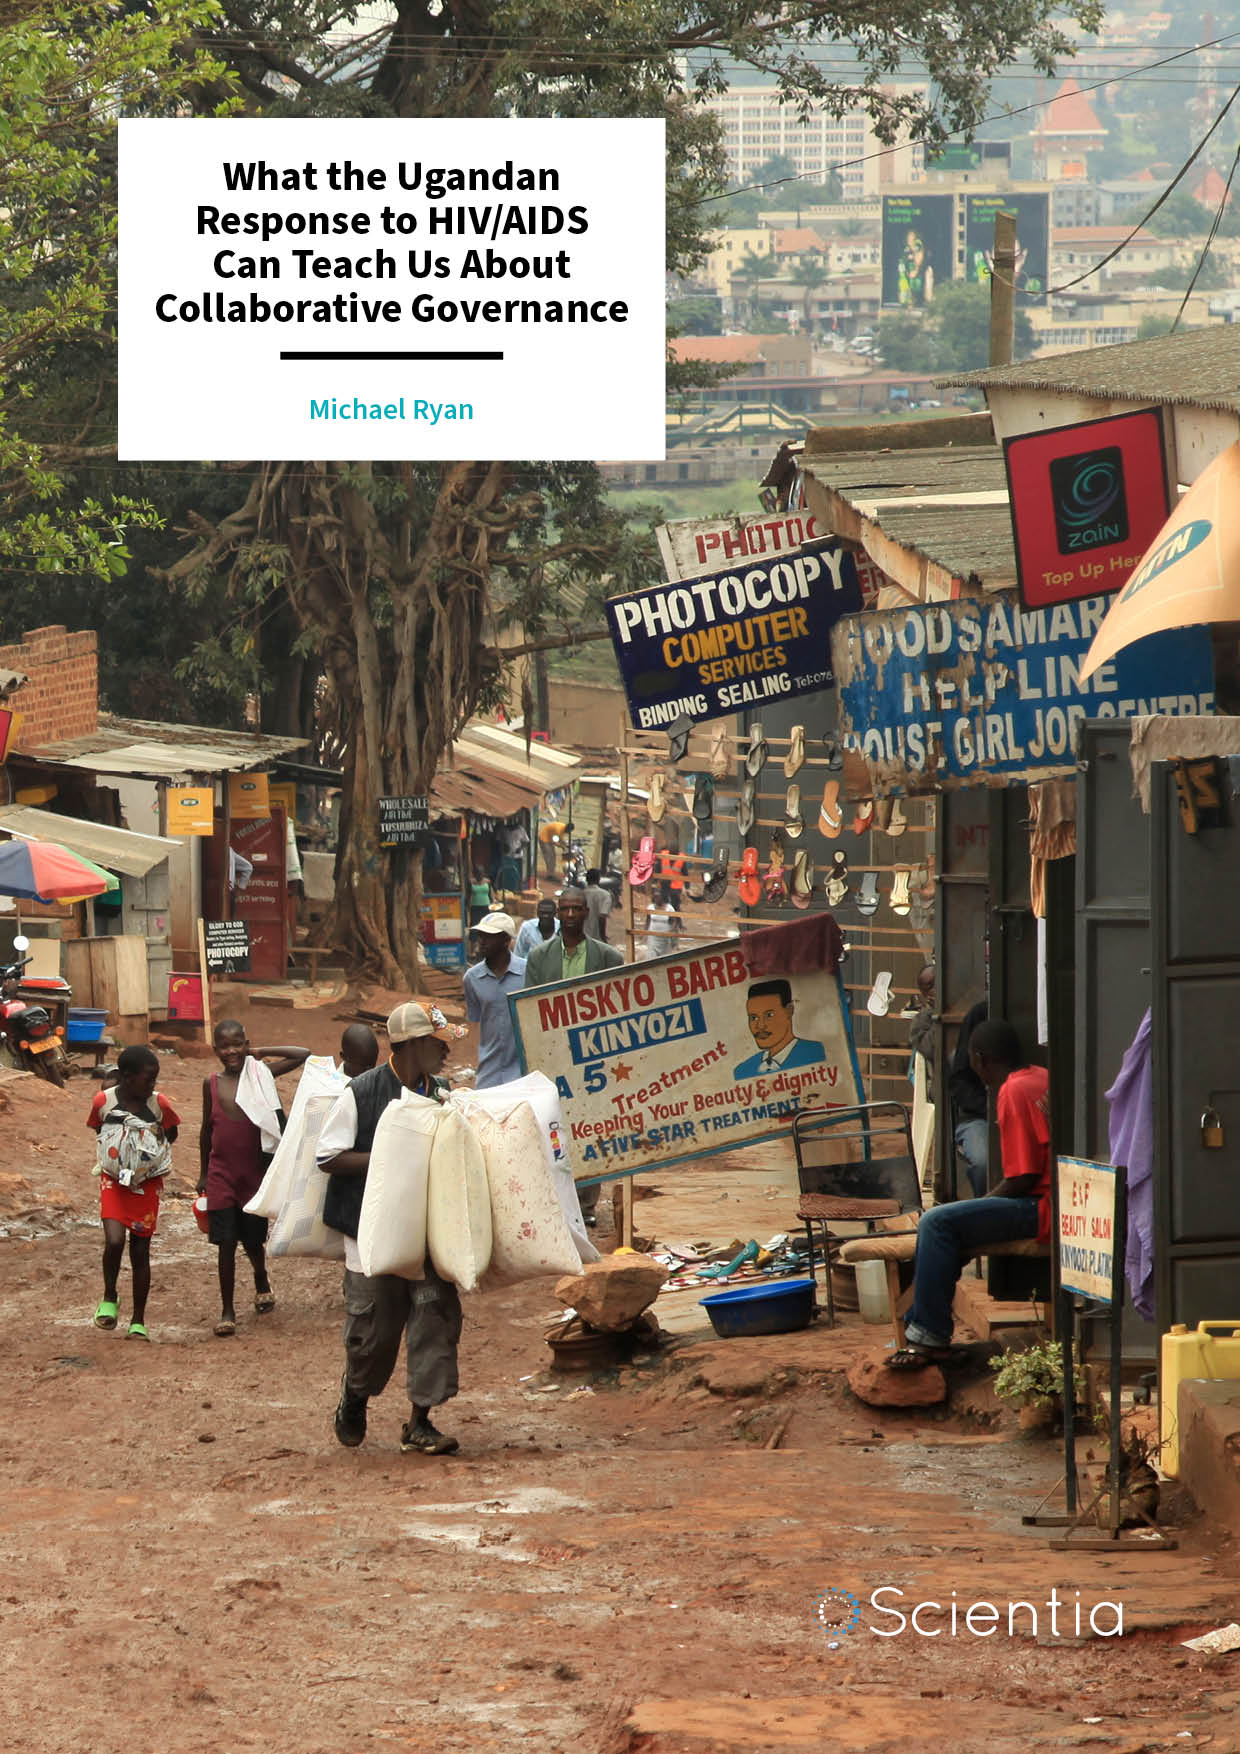 Professor Michael Ryan | What the Ugandan Response to HIV/AIDS Can Teach Us About Collaborative Governance